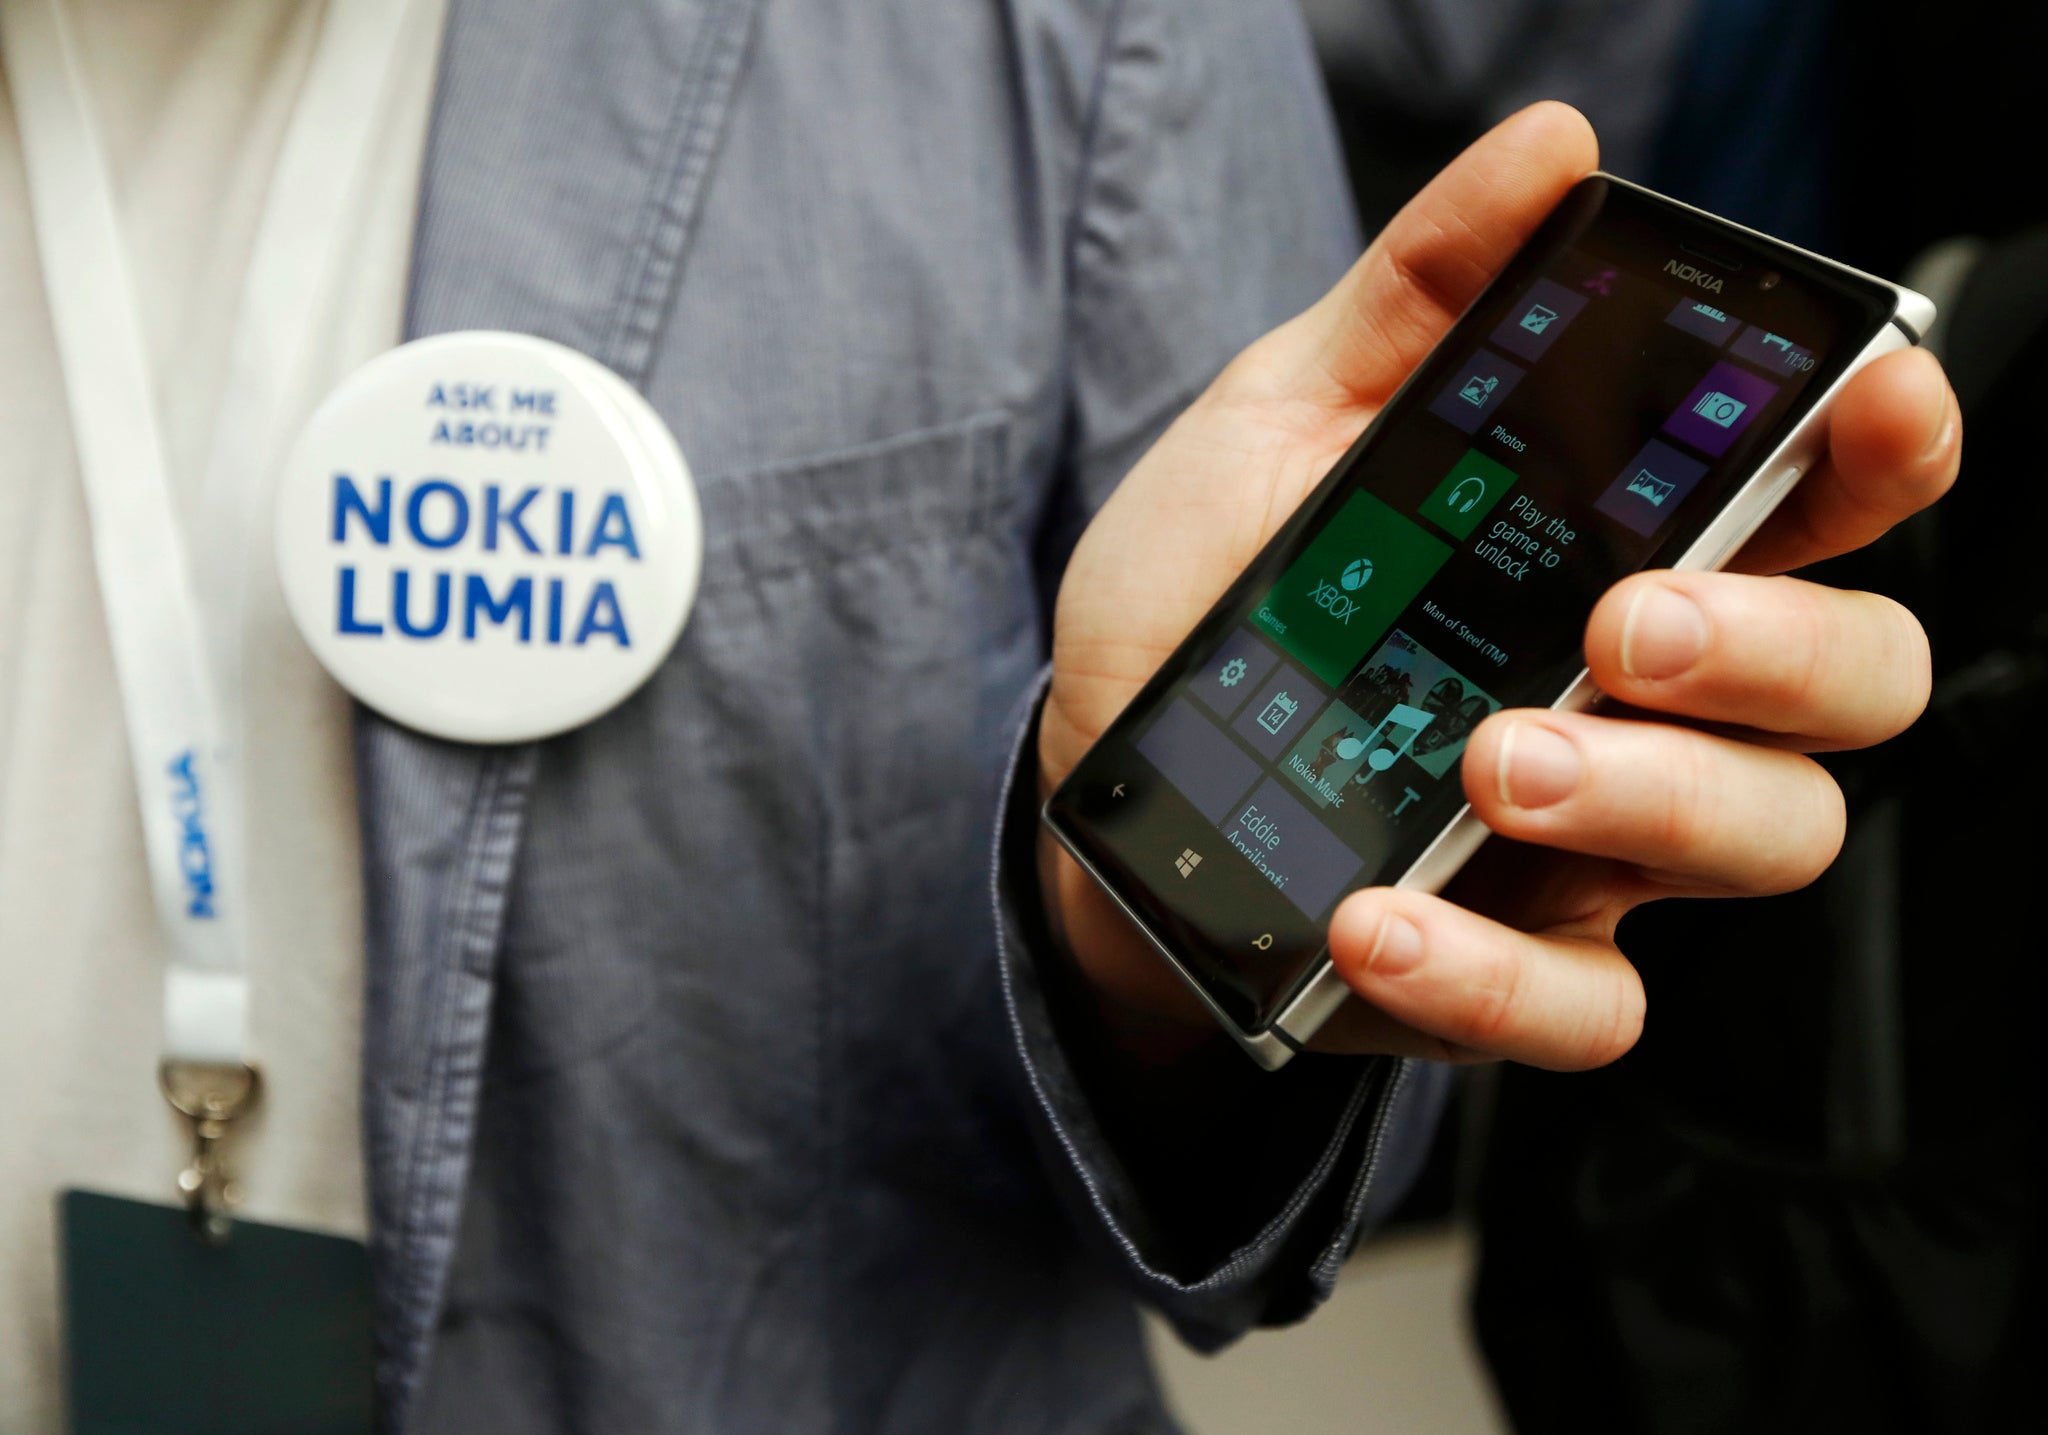 A worker poses with the new Nokia Lumia 925 at its launch in London May 14, 2013. Nokia unveiled a lighter, metal model in its Lumia smartphone range, as it tries to catch the eye of buyers to close the huge market lead of rivals Samsung and Apple Inc in